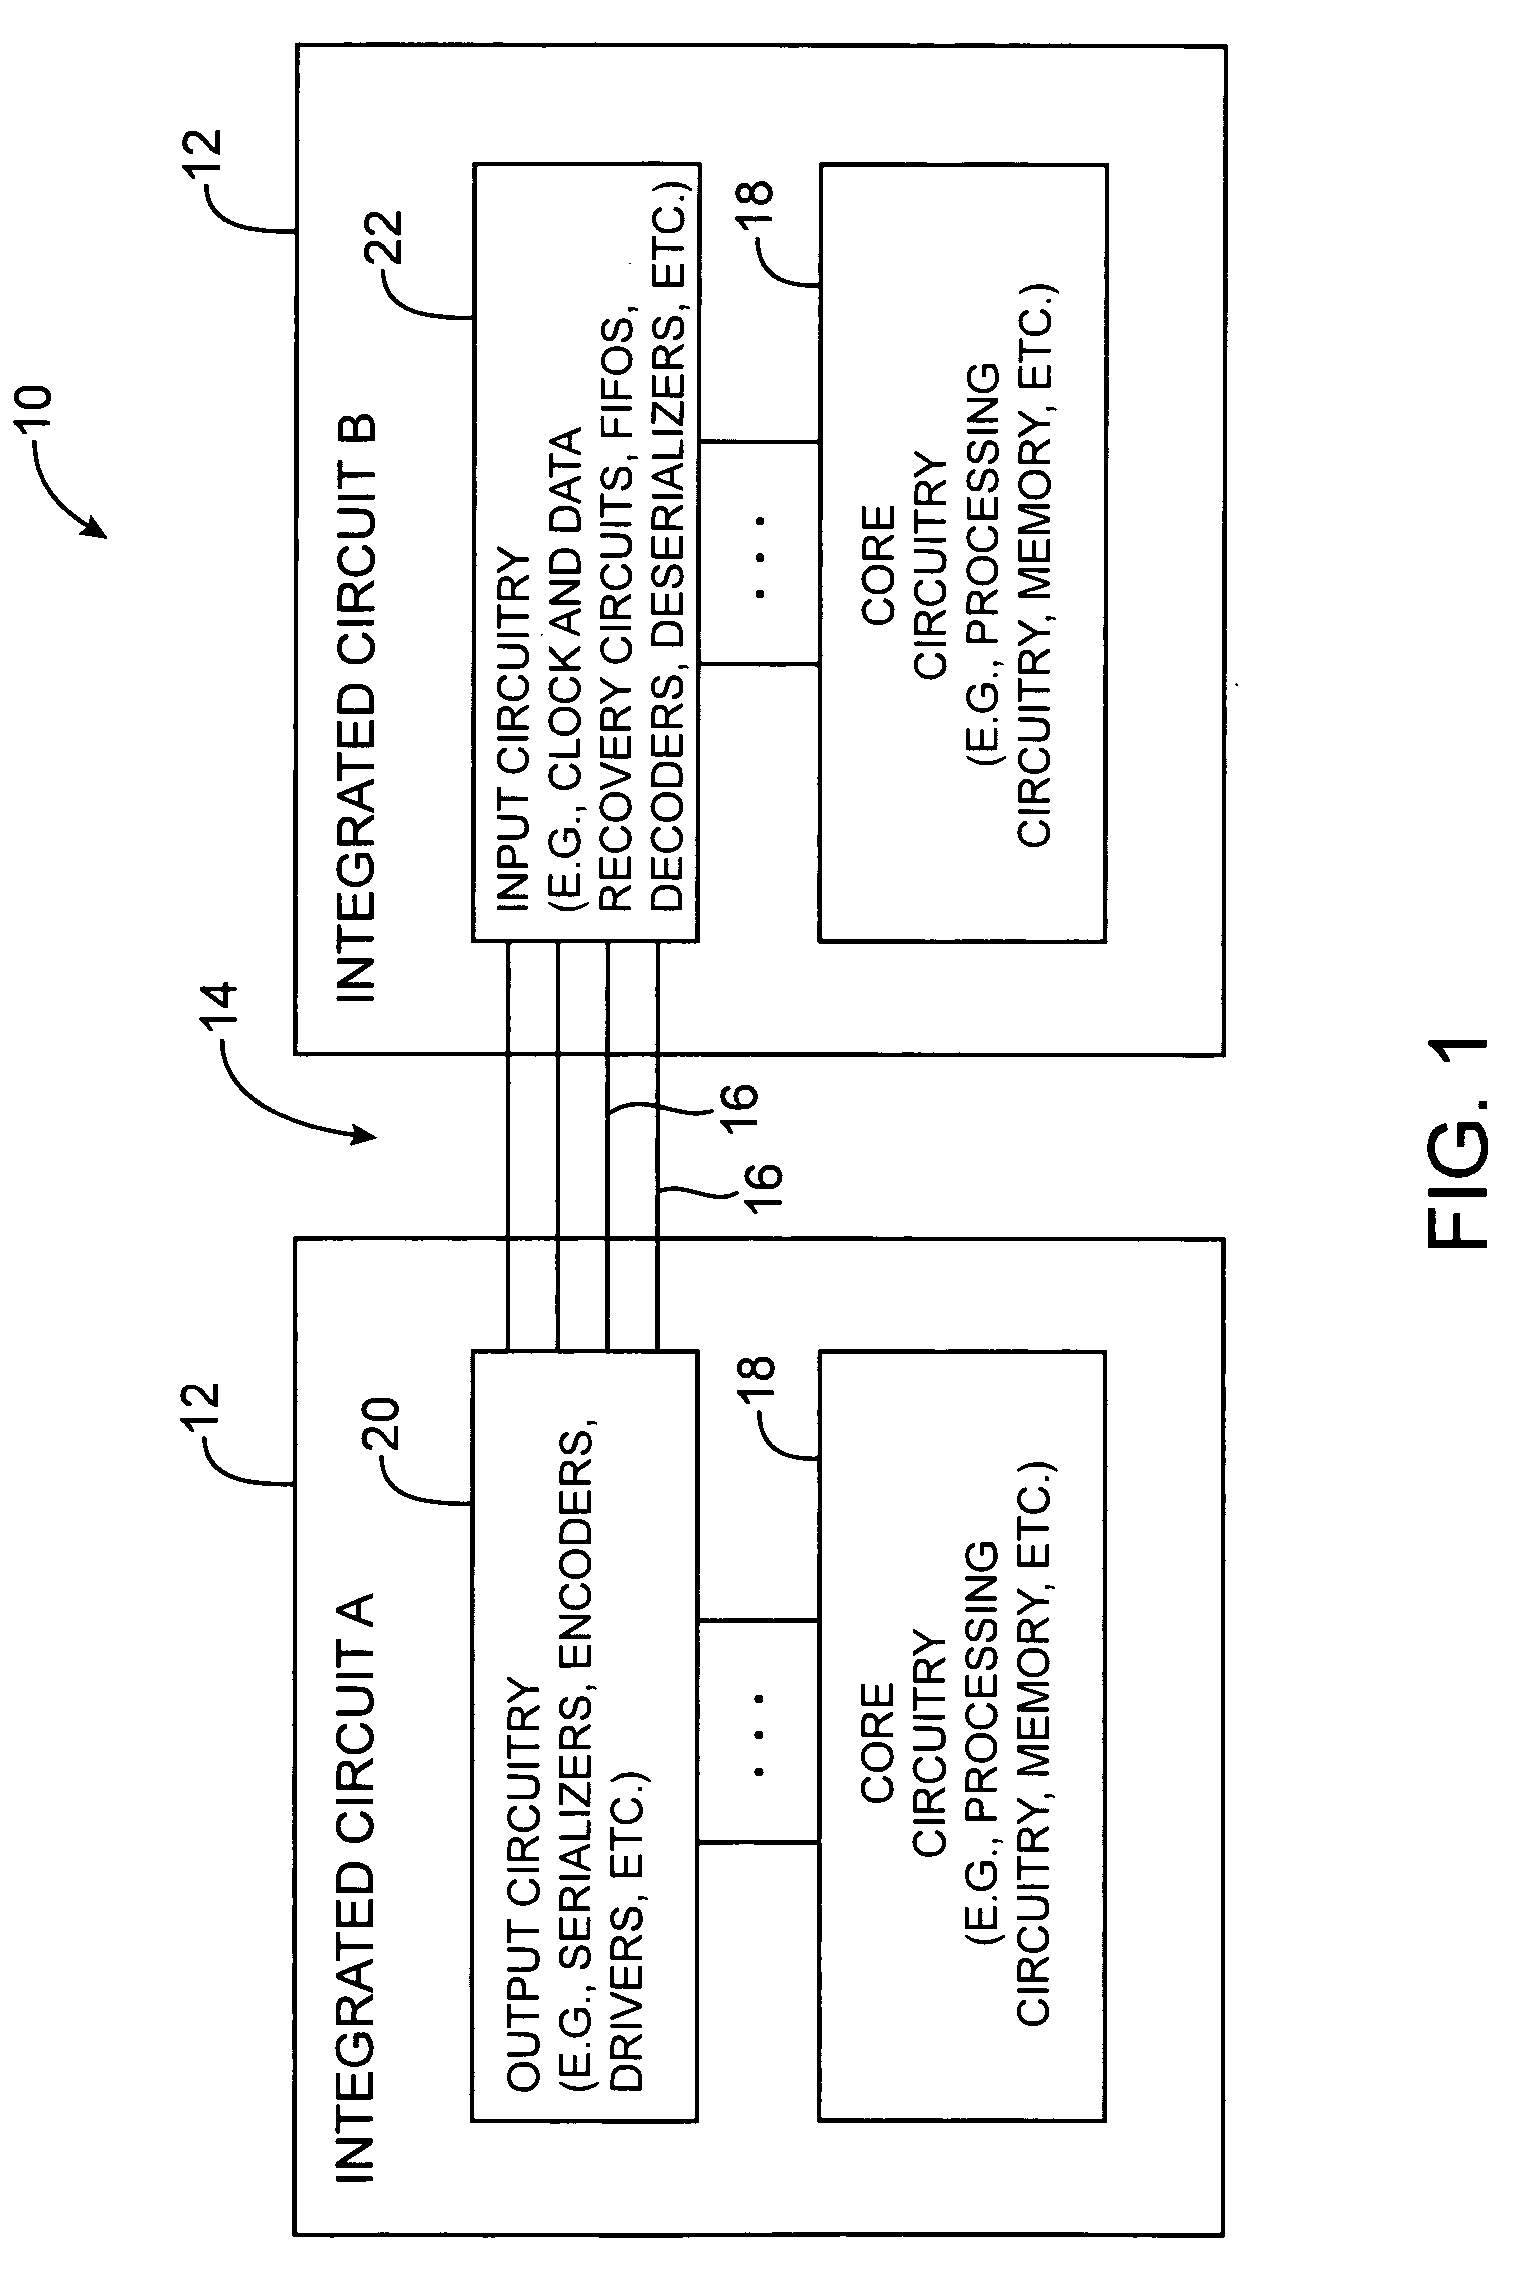 Process for producing dried, singulated fibers using steam and heated air